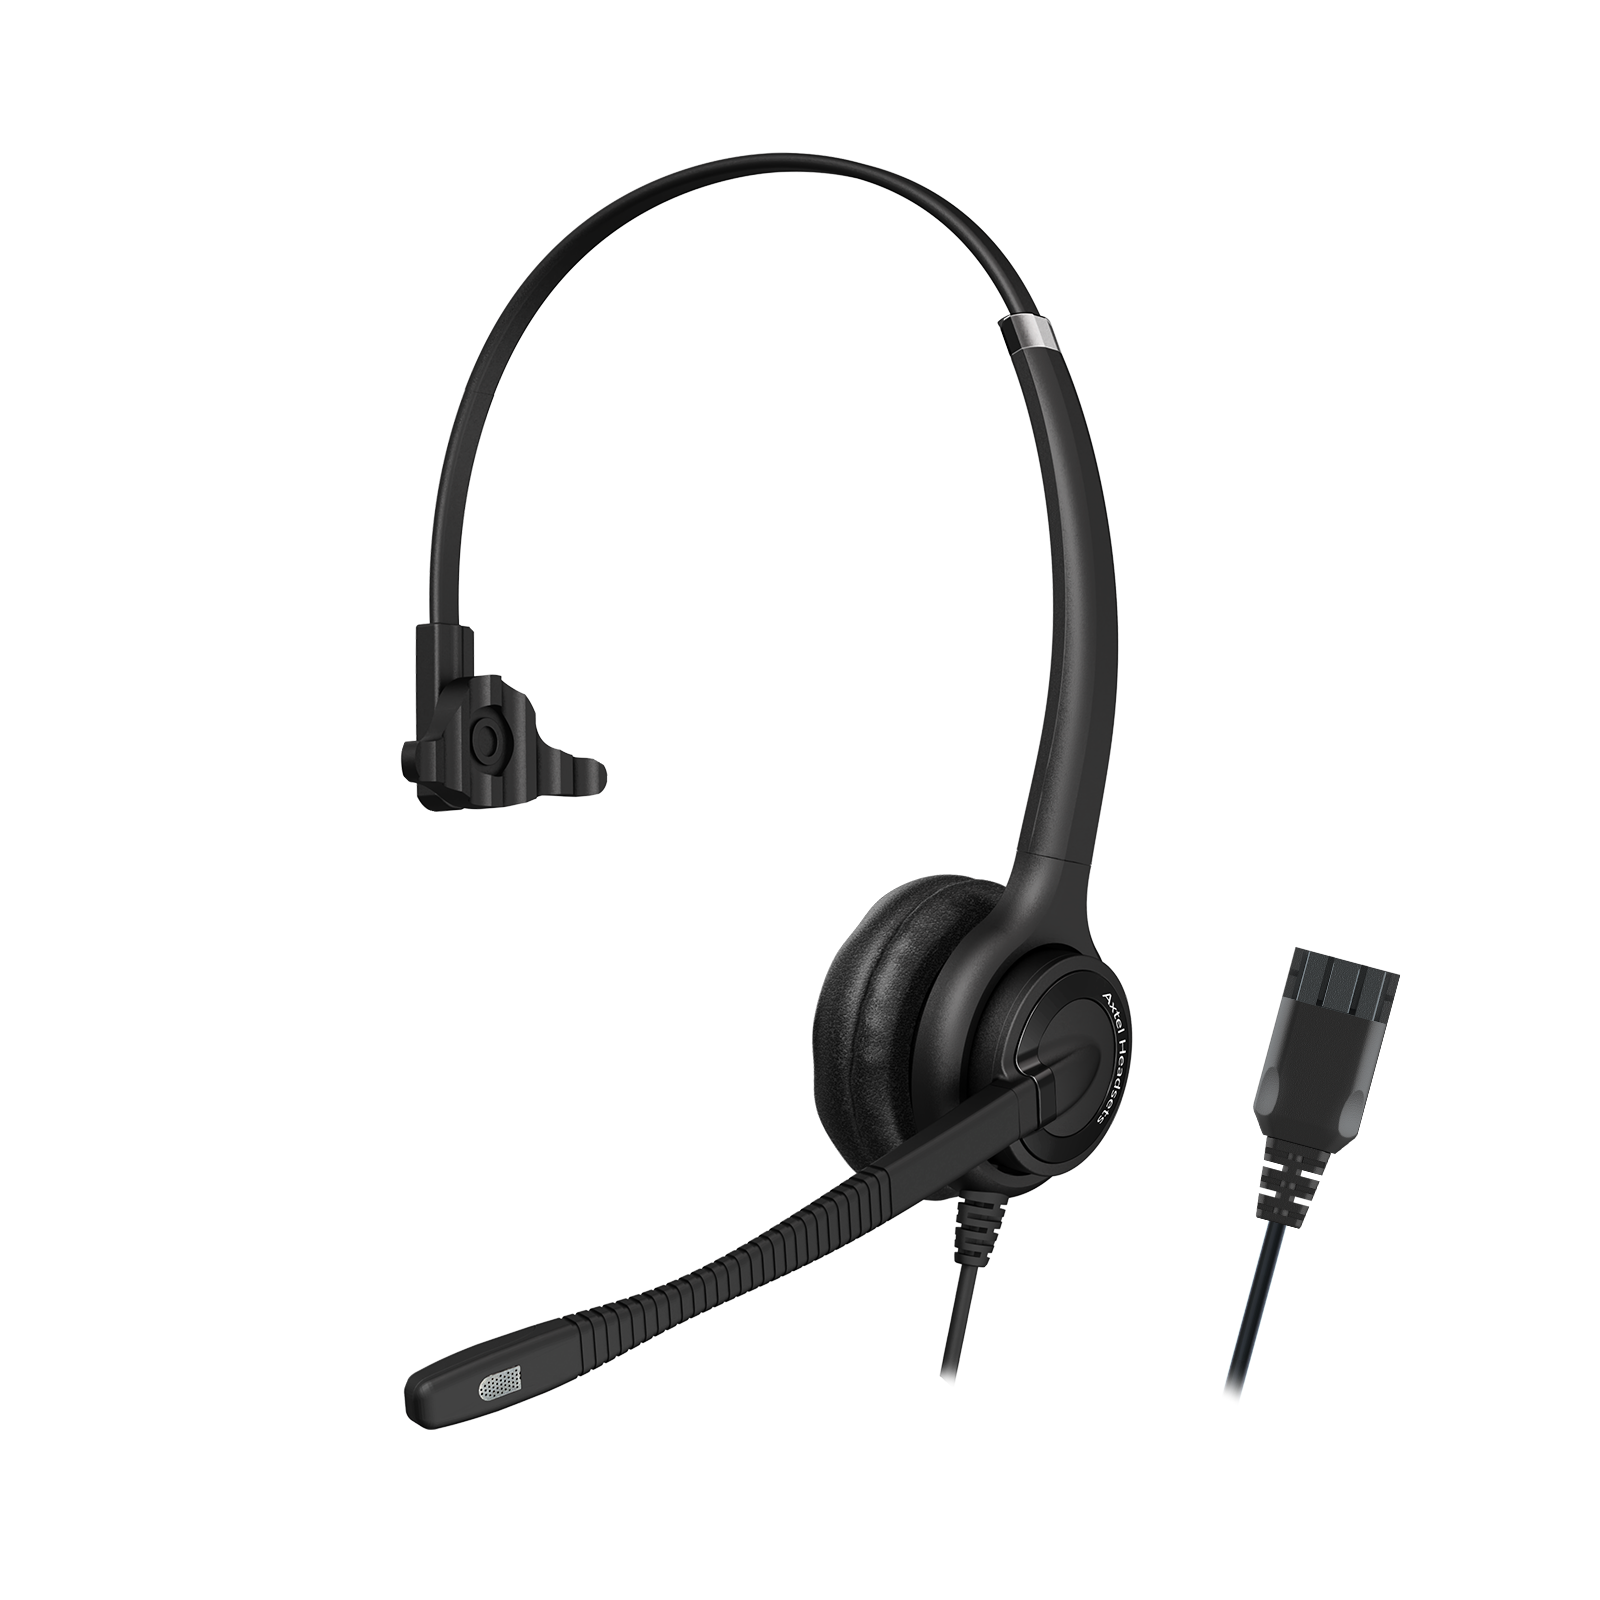 AXTEL-AXH-EHDM-HEADSET-WITH-CONNECTOR